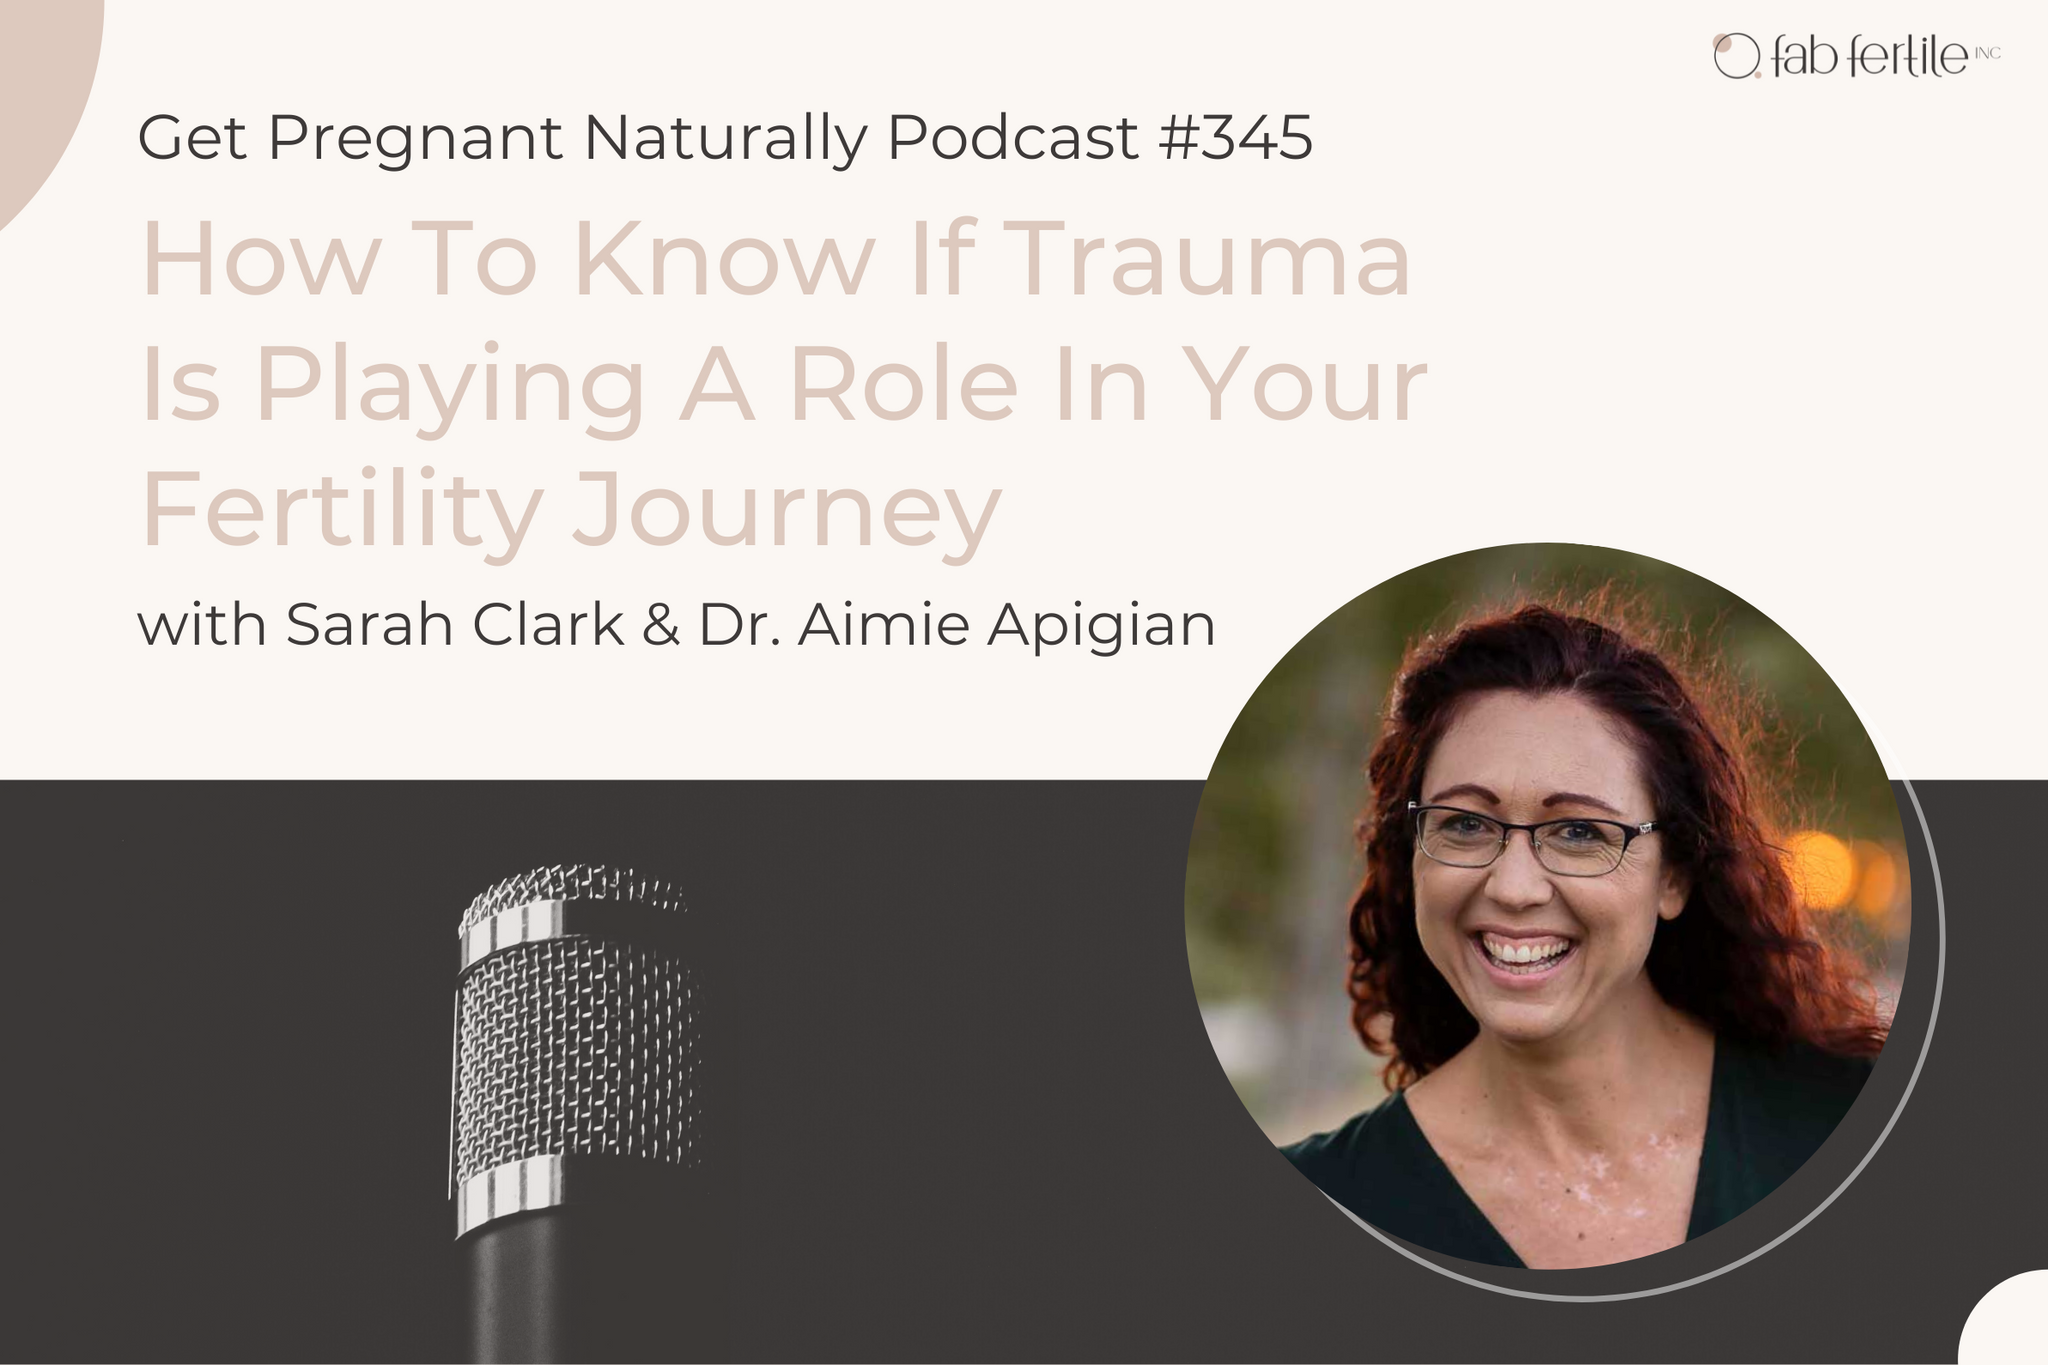 How To Know If Trauma Is Playing A Role In Your Fertility Journey